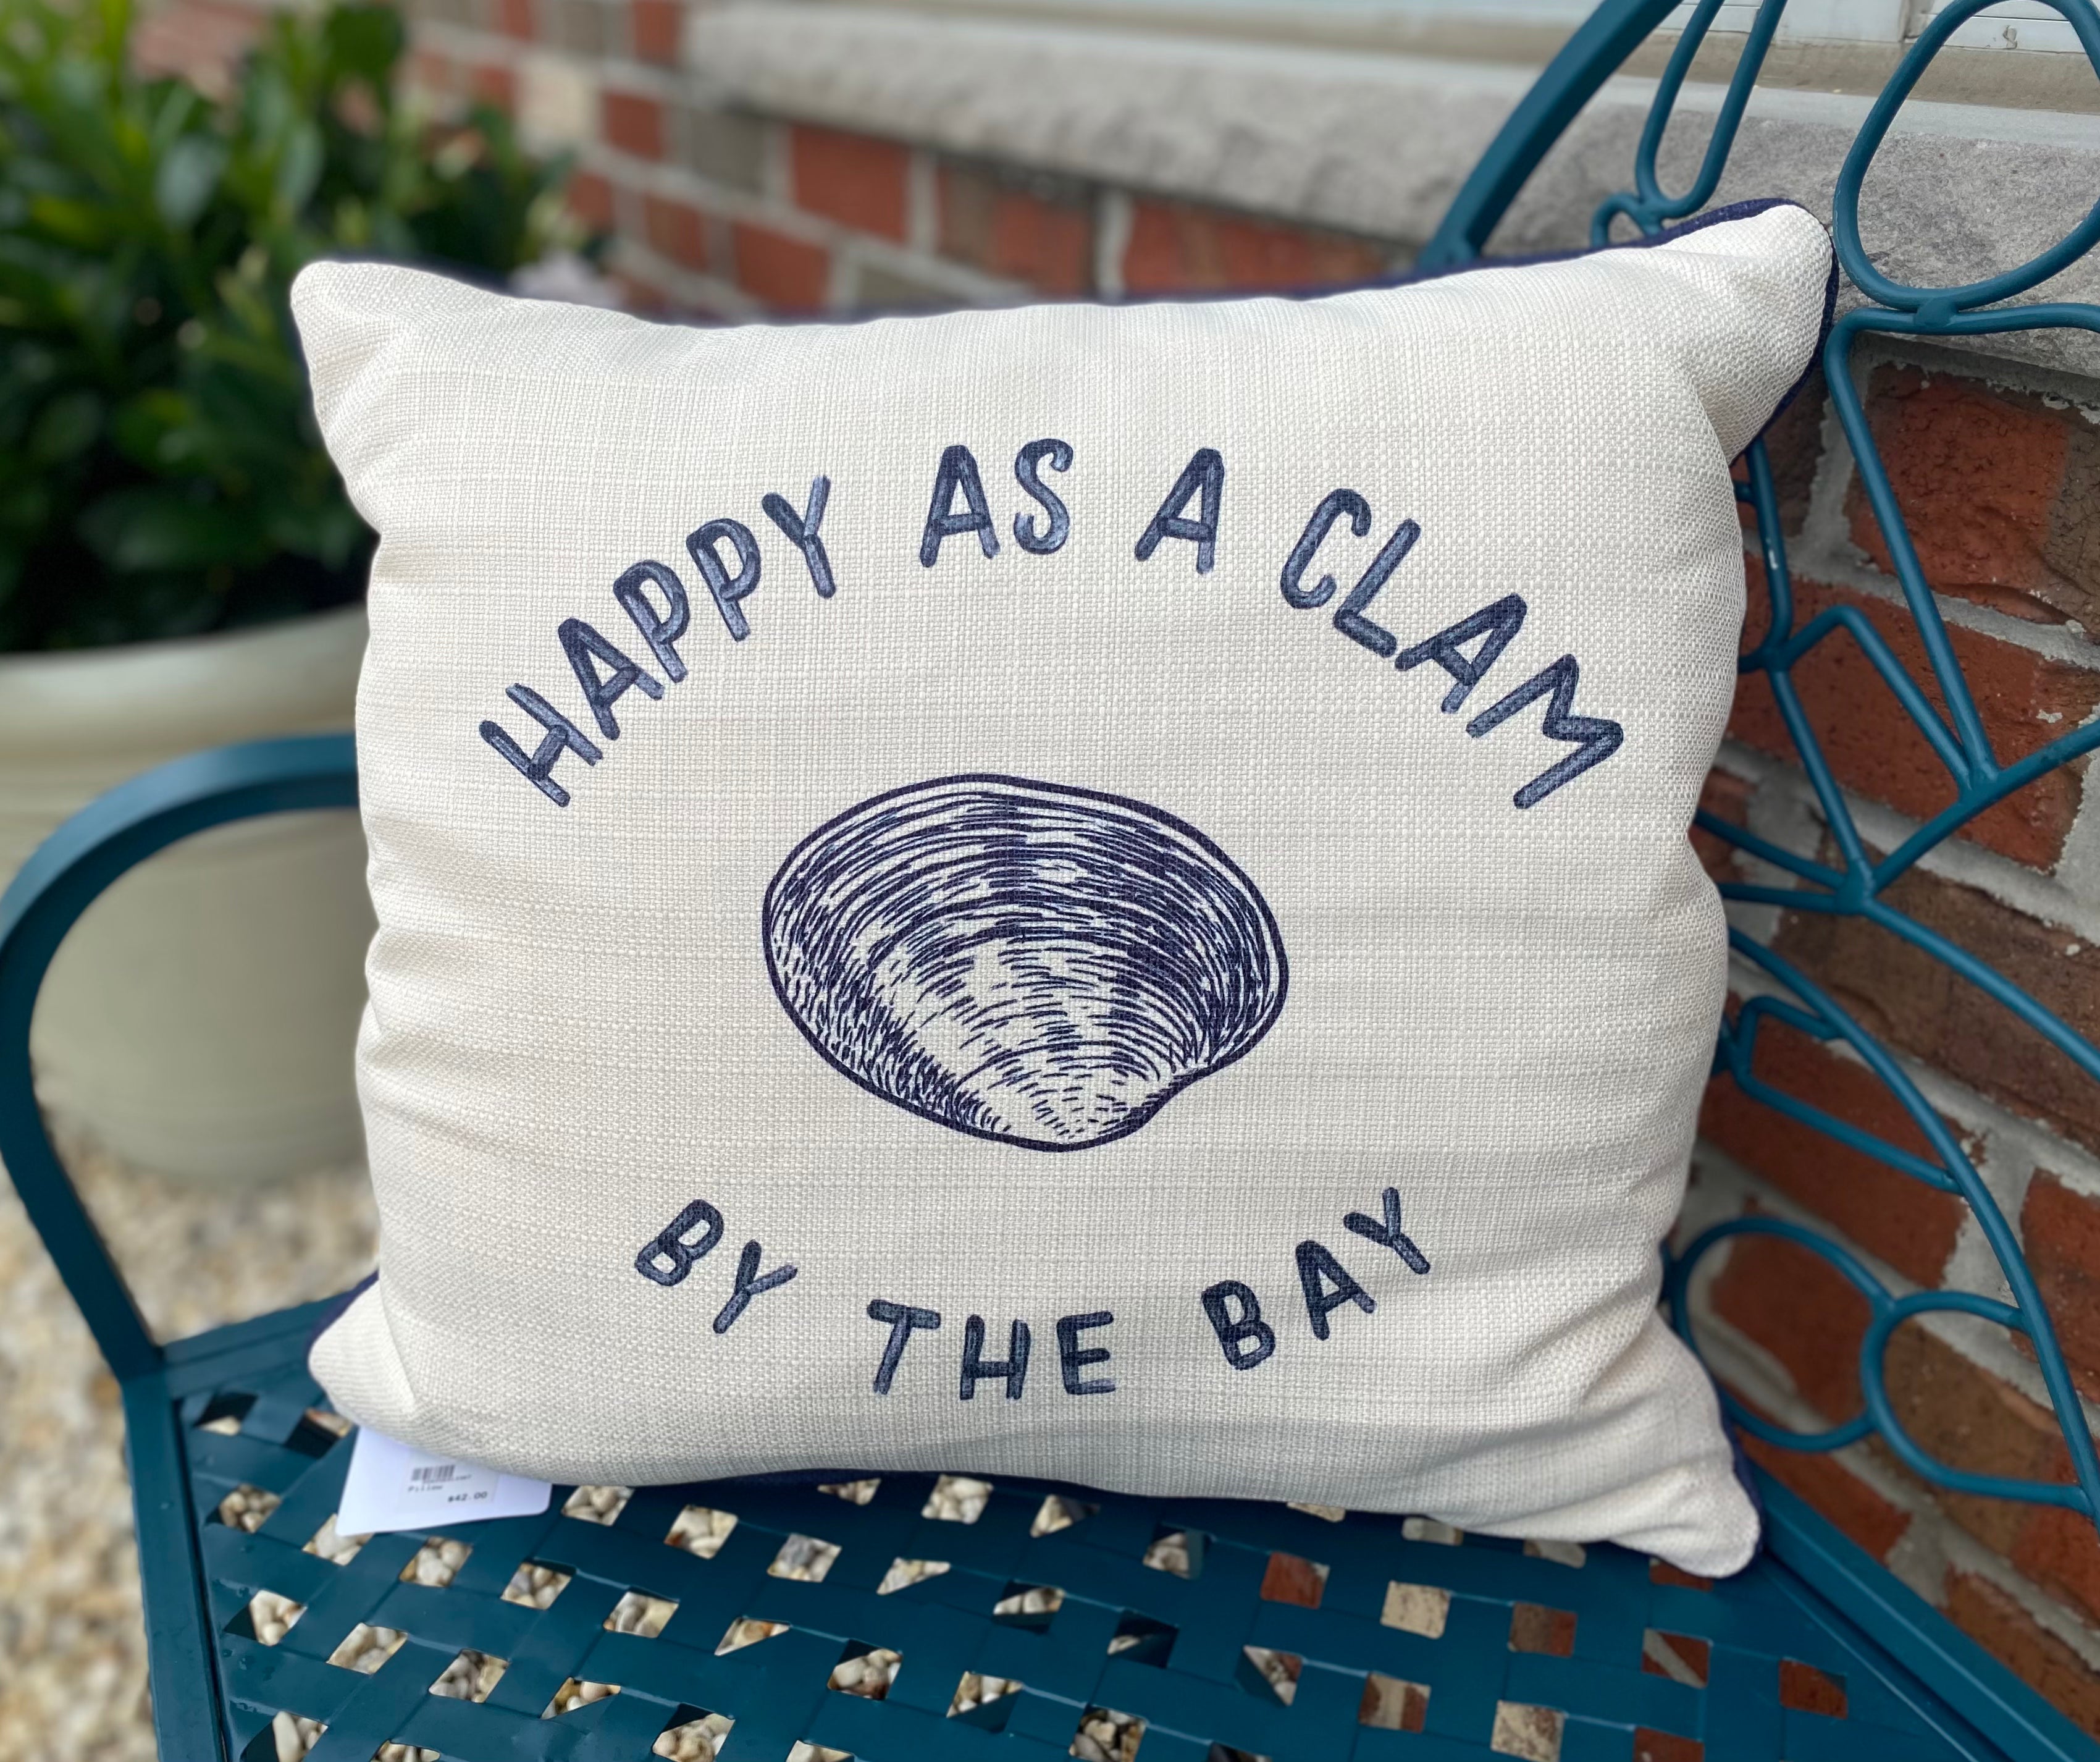 HAPPY AS A CLAM BY THE BAY PILLOW